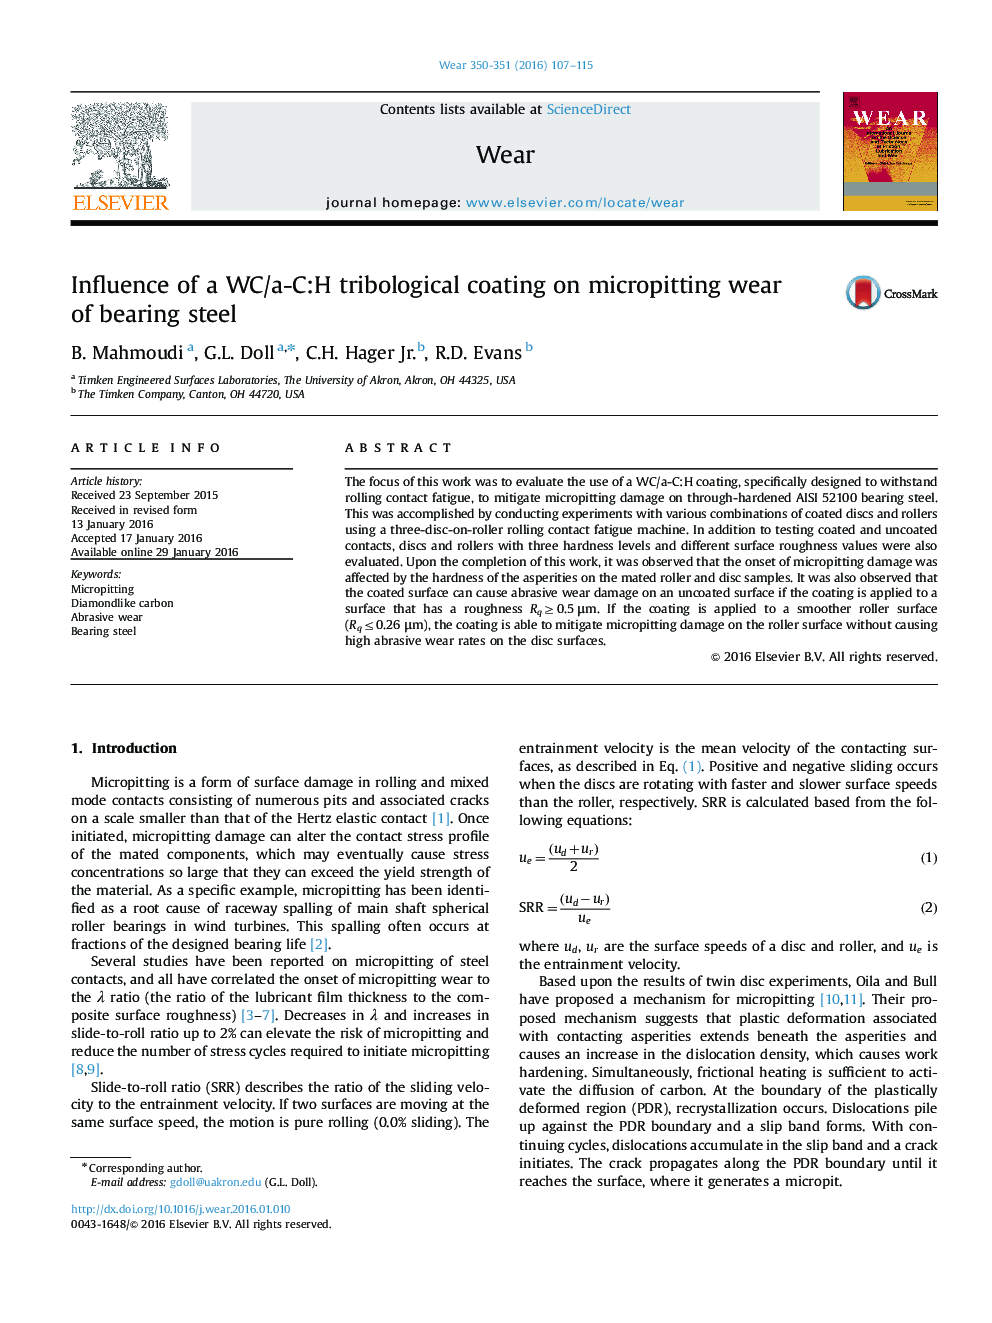 Influence of a WC/a-C:H tribological coating on micropitting wear of bearing steel